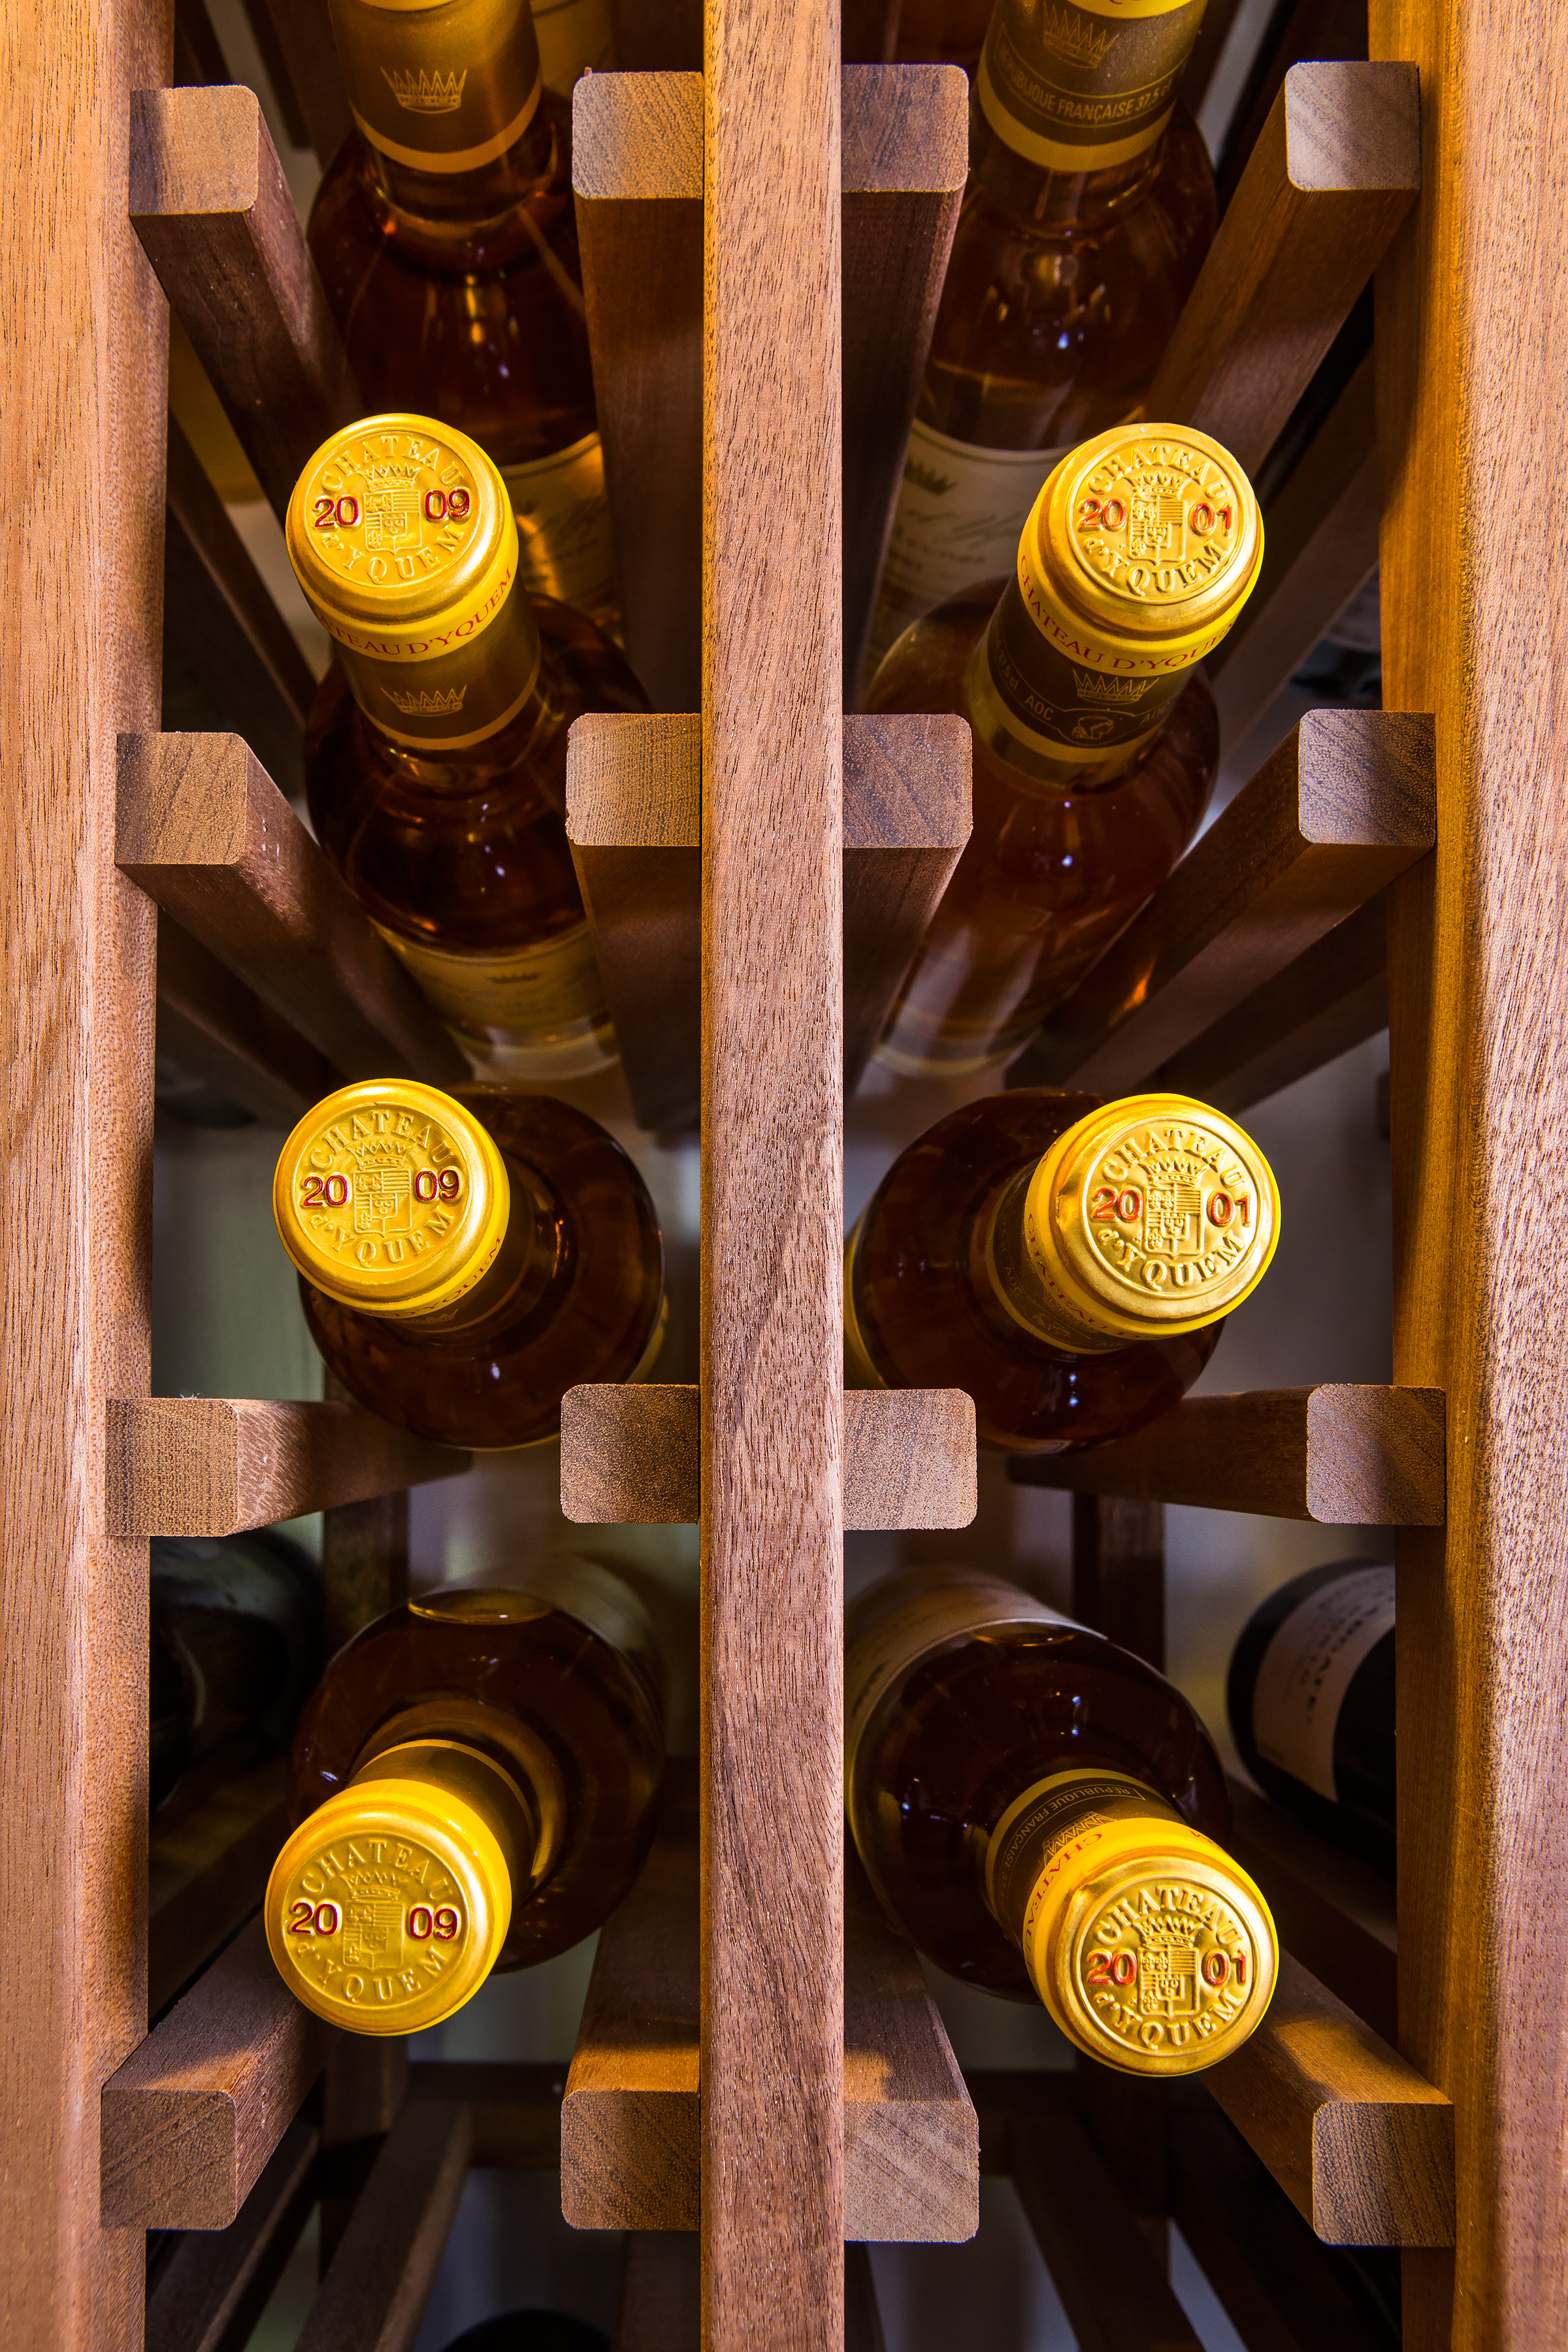 The wine in these golden bottles from the famed Chateau d’Yquem in Sauternes, France, has been described as nectar for the gods and is made with sweetness and freshness from Botrytis cinerea, or “noble rot,” which is allowed to grow on the grapes before harvesting. Thomas Jefferson was known to have purchased cases of this wine, which can last for 100 years.